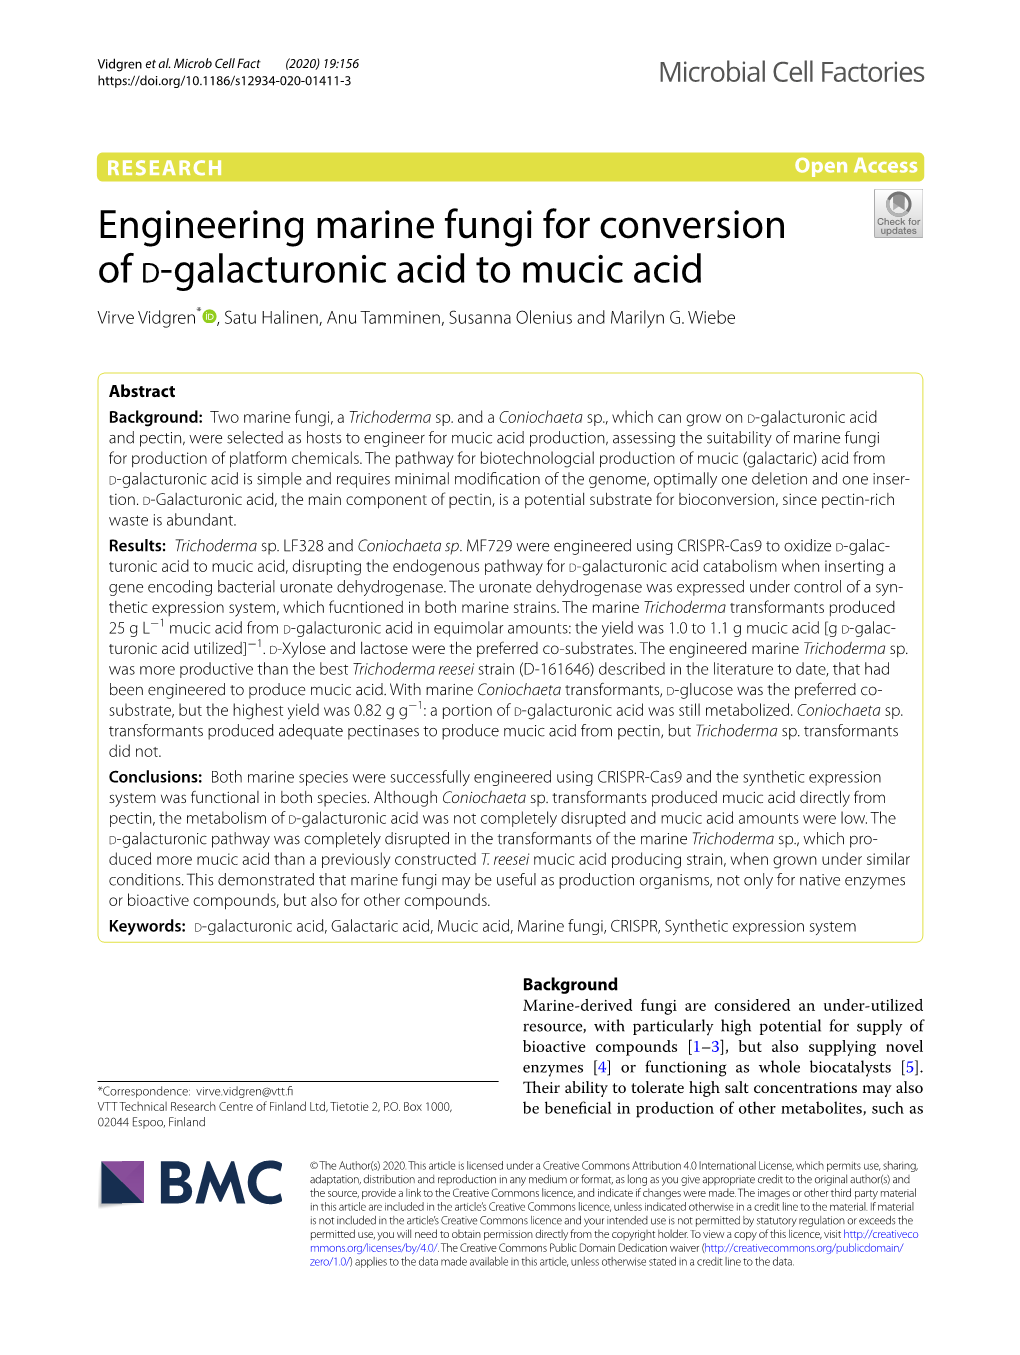 Engineering Marine Fungi for Conversion of D-Galacturonic Acid To